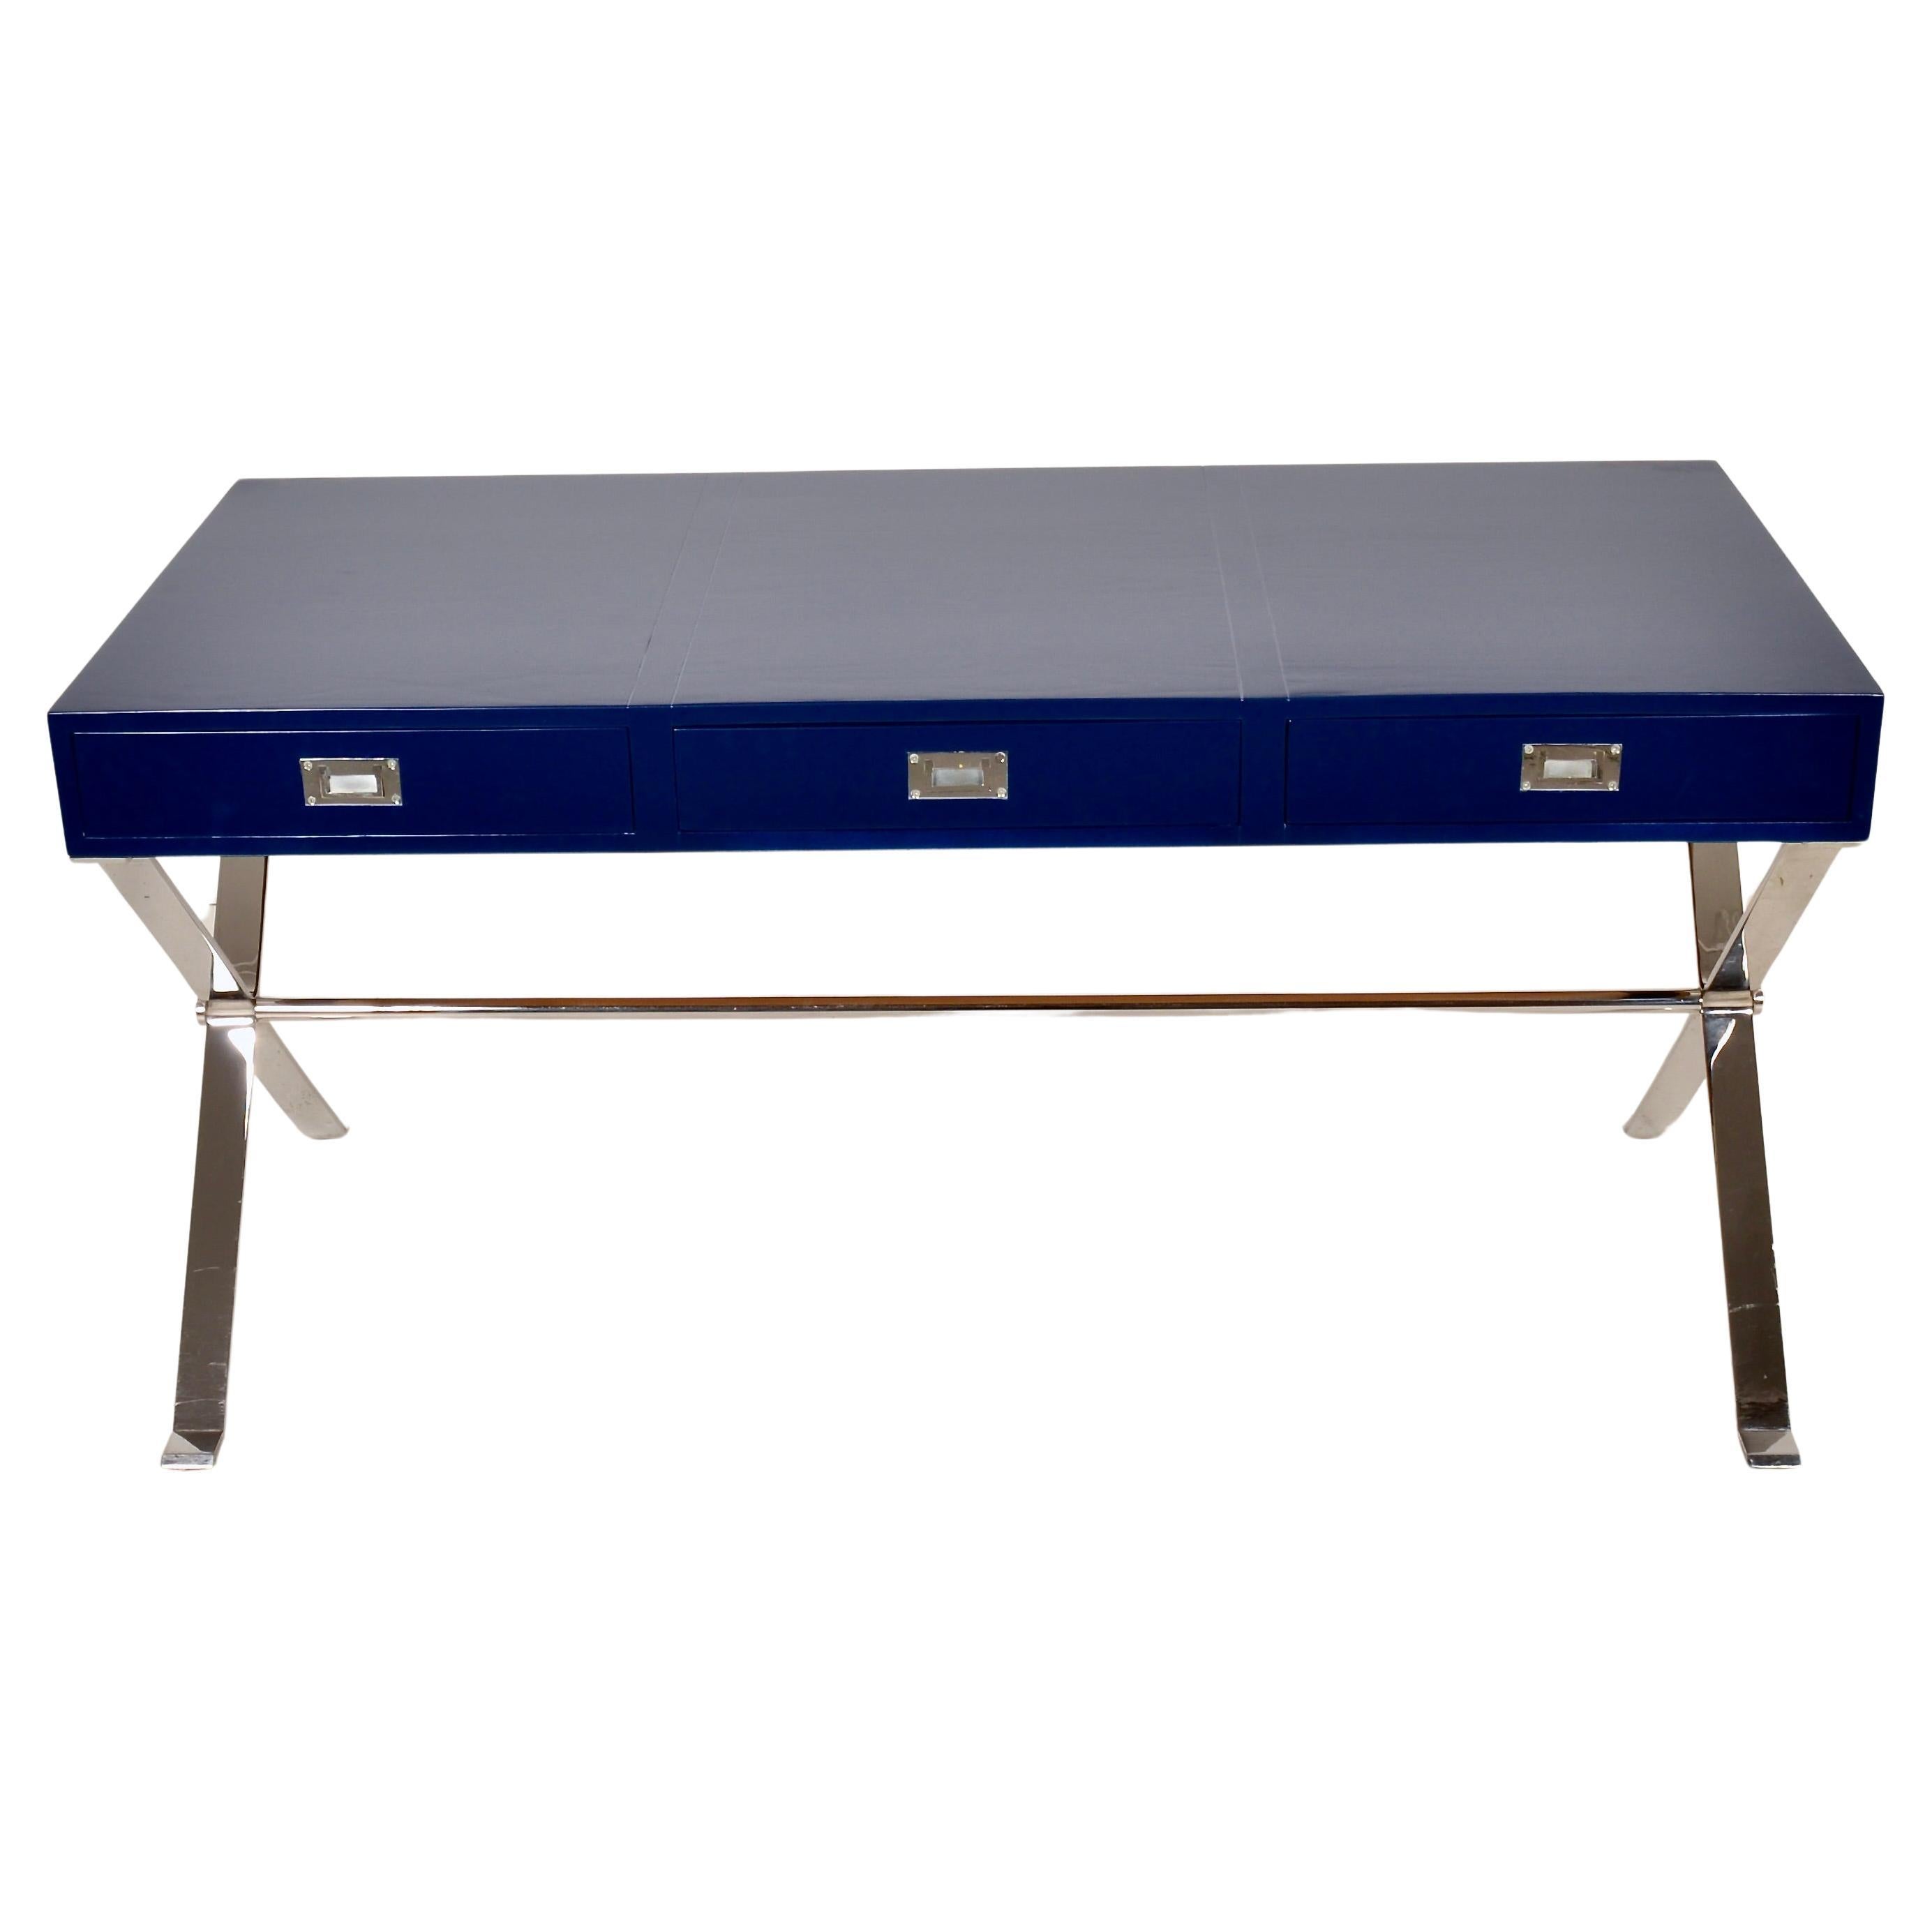 Modern Campaign-Style Desk, Lacquered in Navy Blue